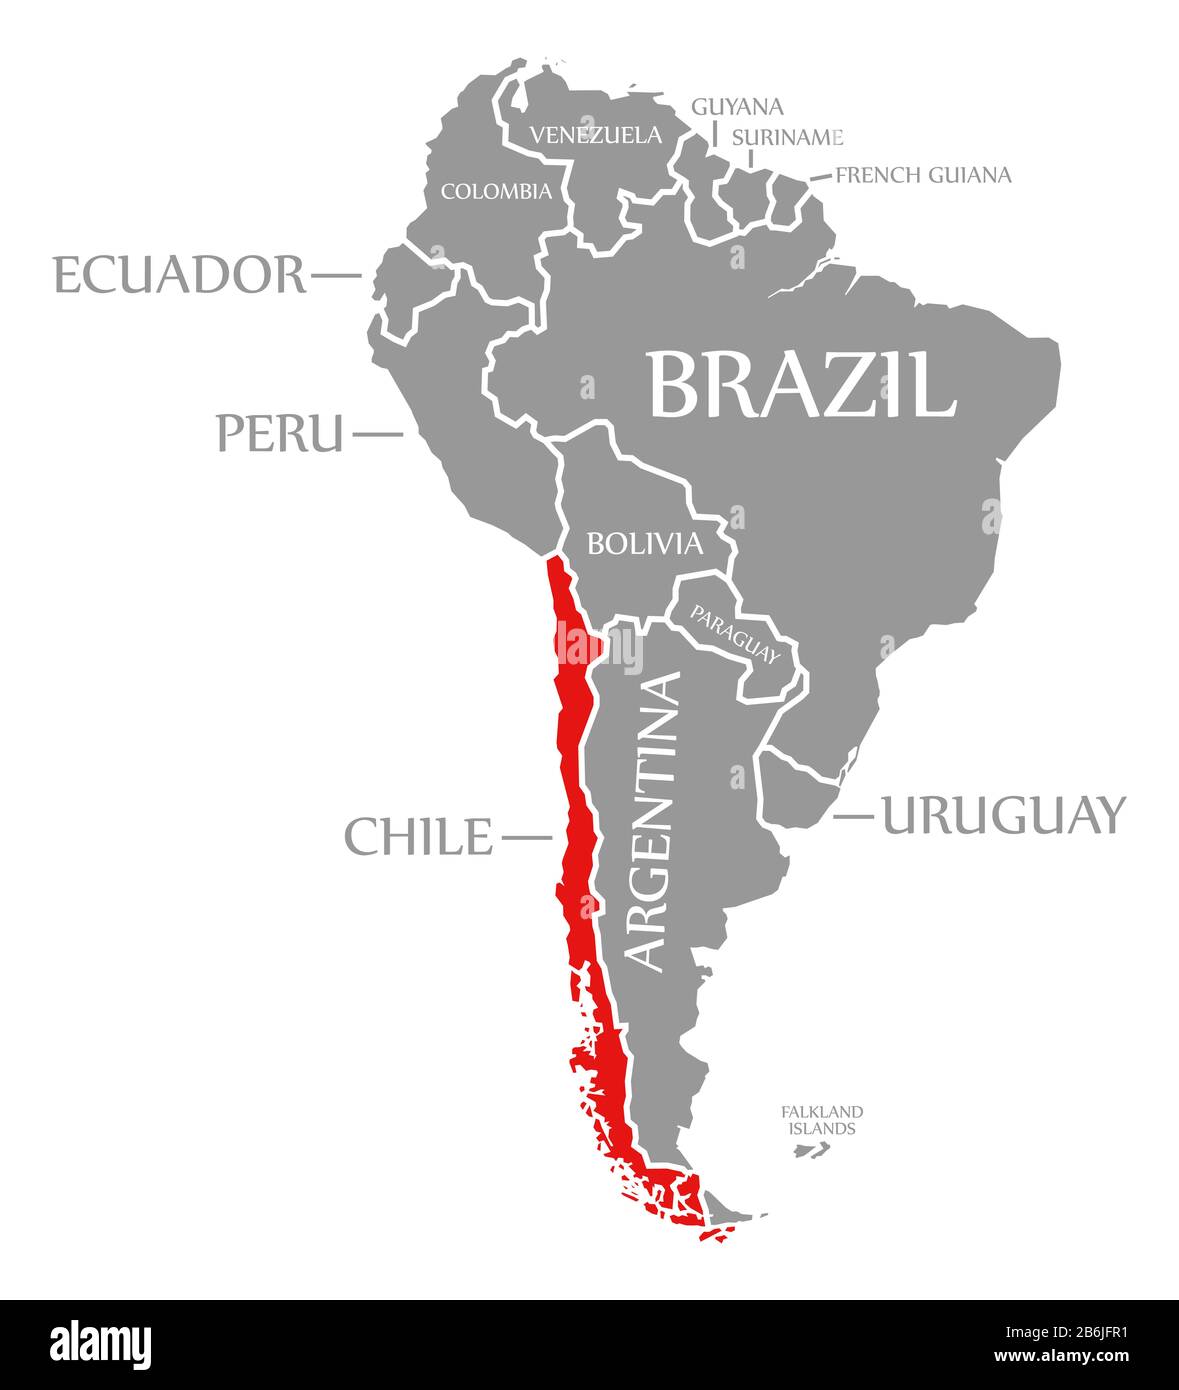 Chile red highlighted in continent map of South America Stock Photo